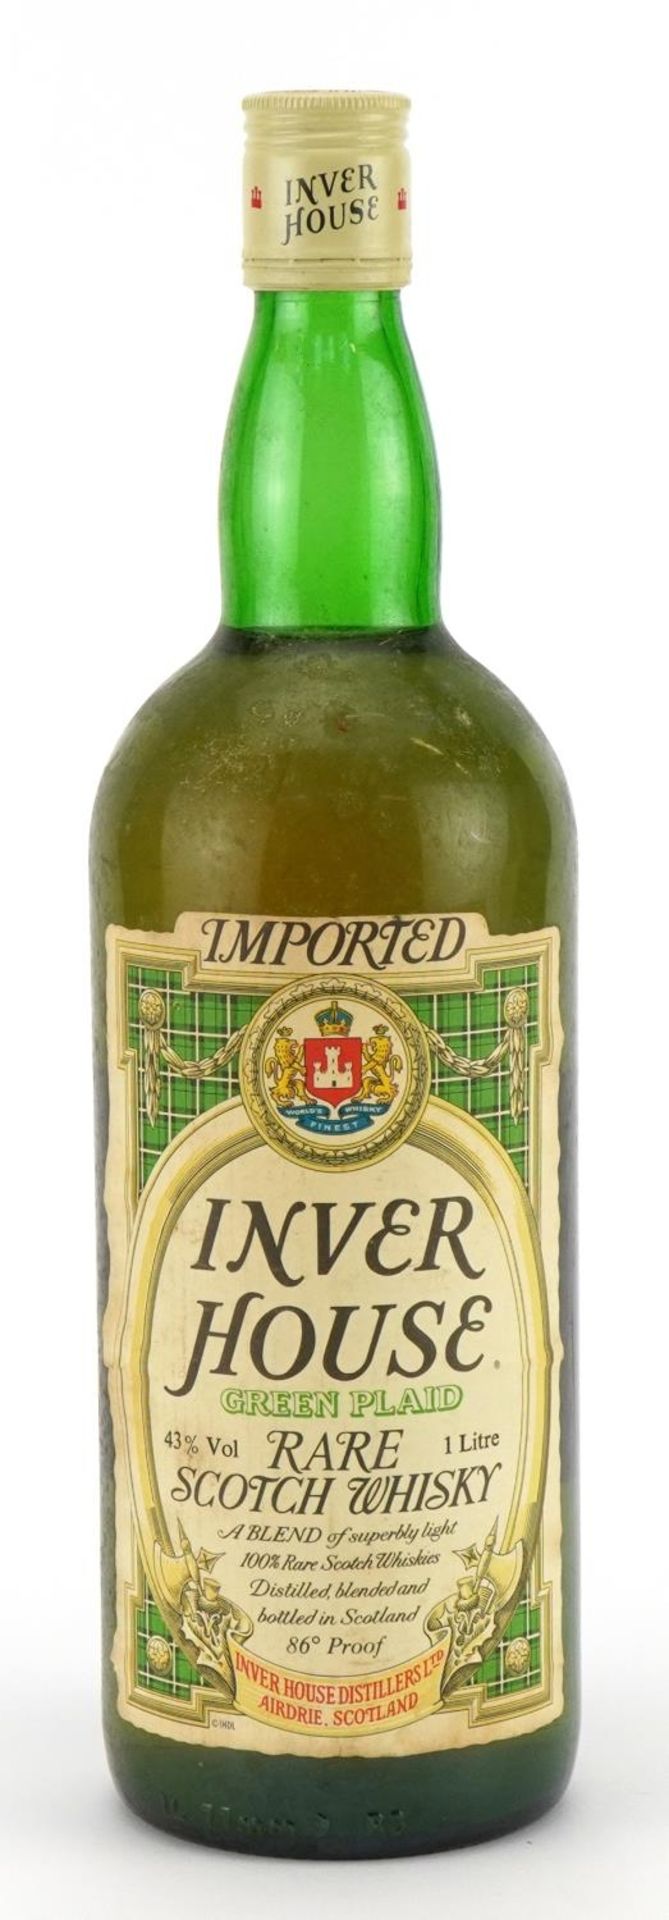 One litre bottle of Inver House Green Plaid Rare Scotch Whisky For further information on this lot